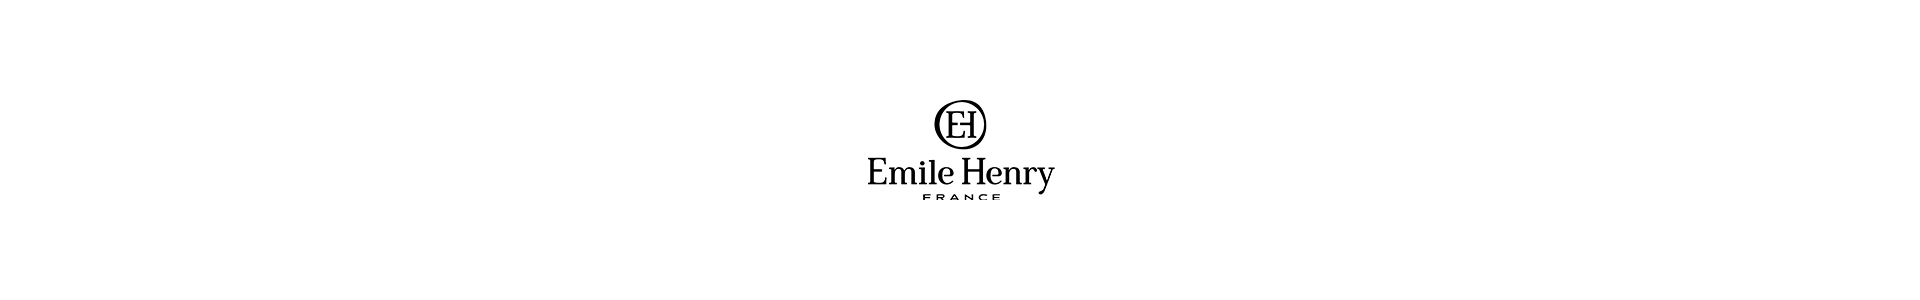 Articles Culinaires EMILE HENRY